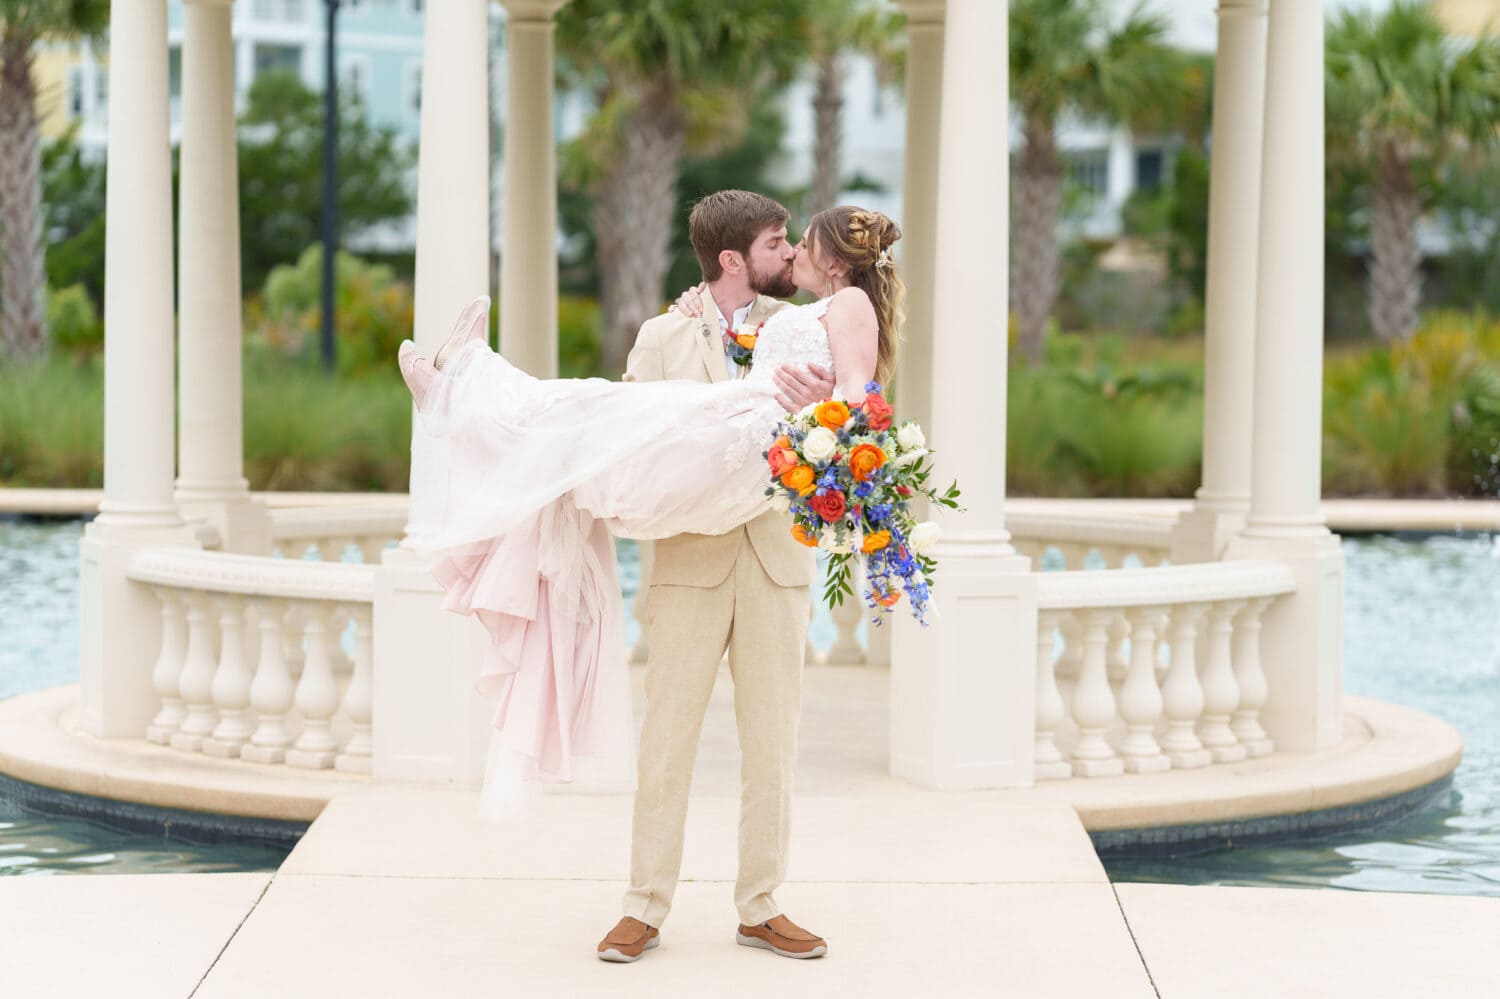 Groom lifting bride up for a kiss - 21 Main Events - North Myrtle Beach